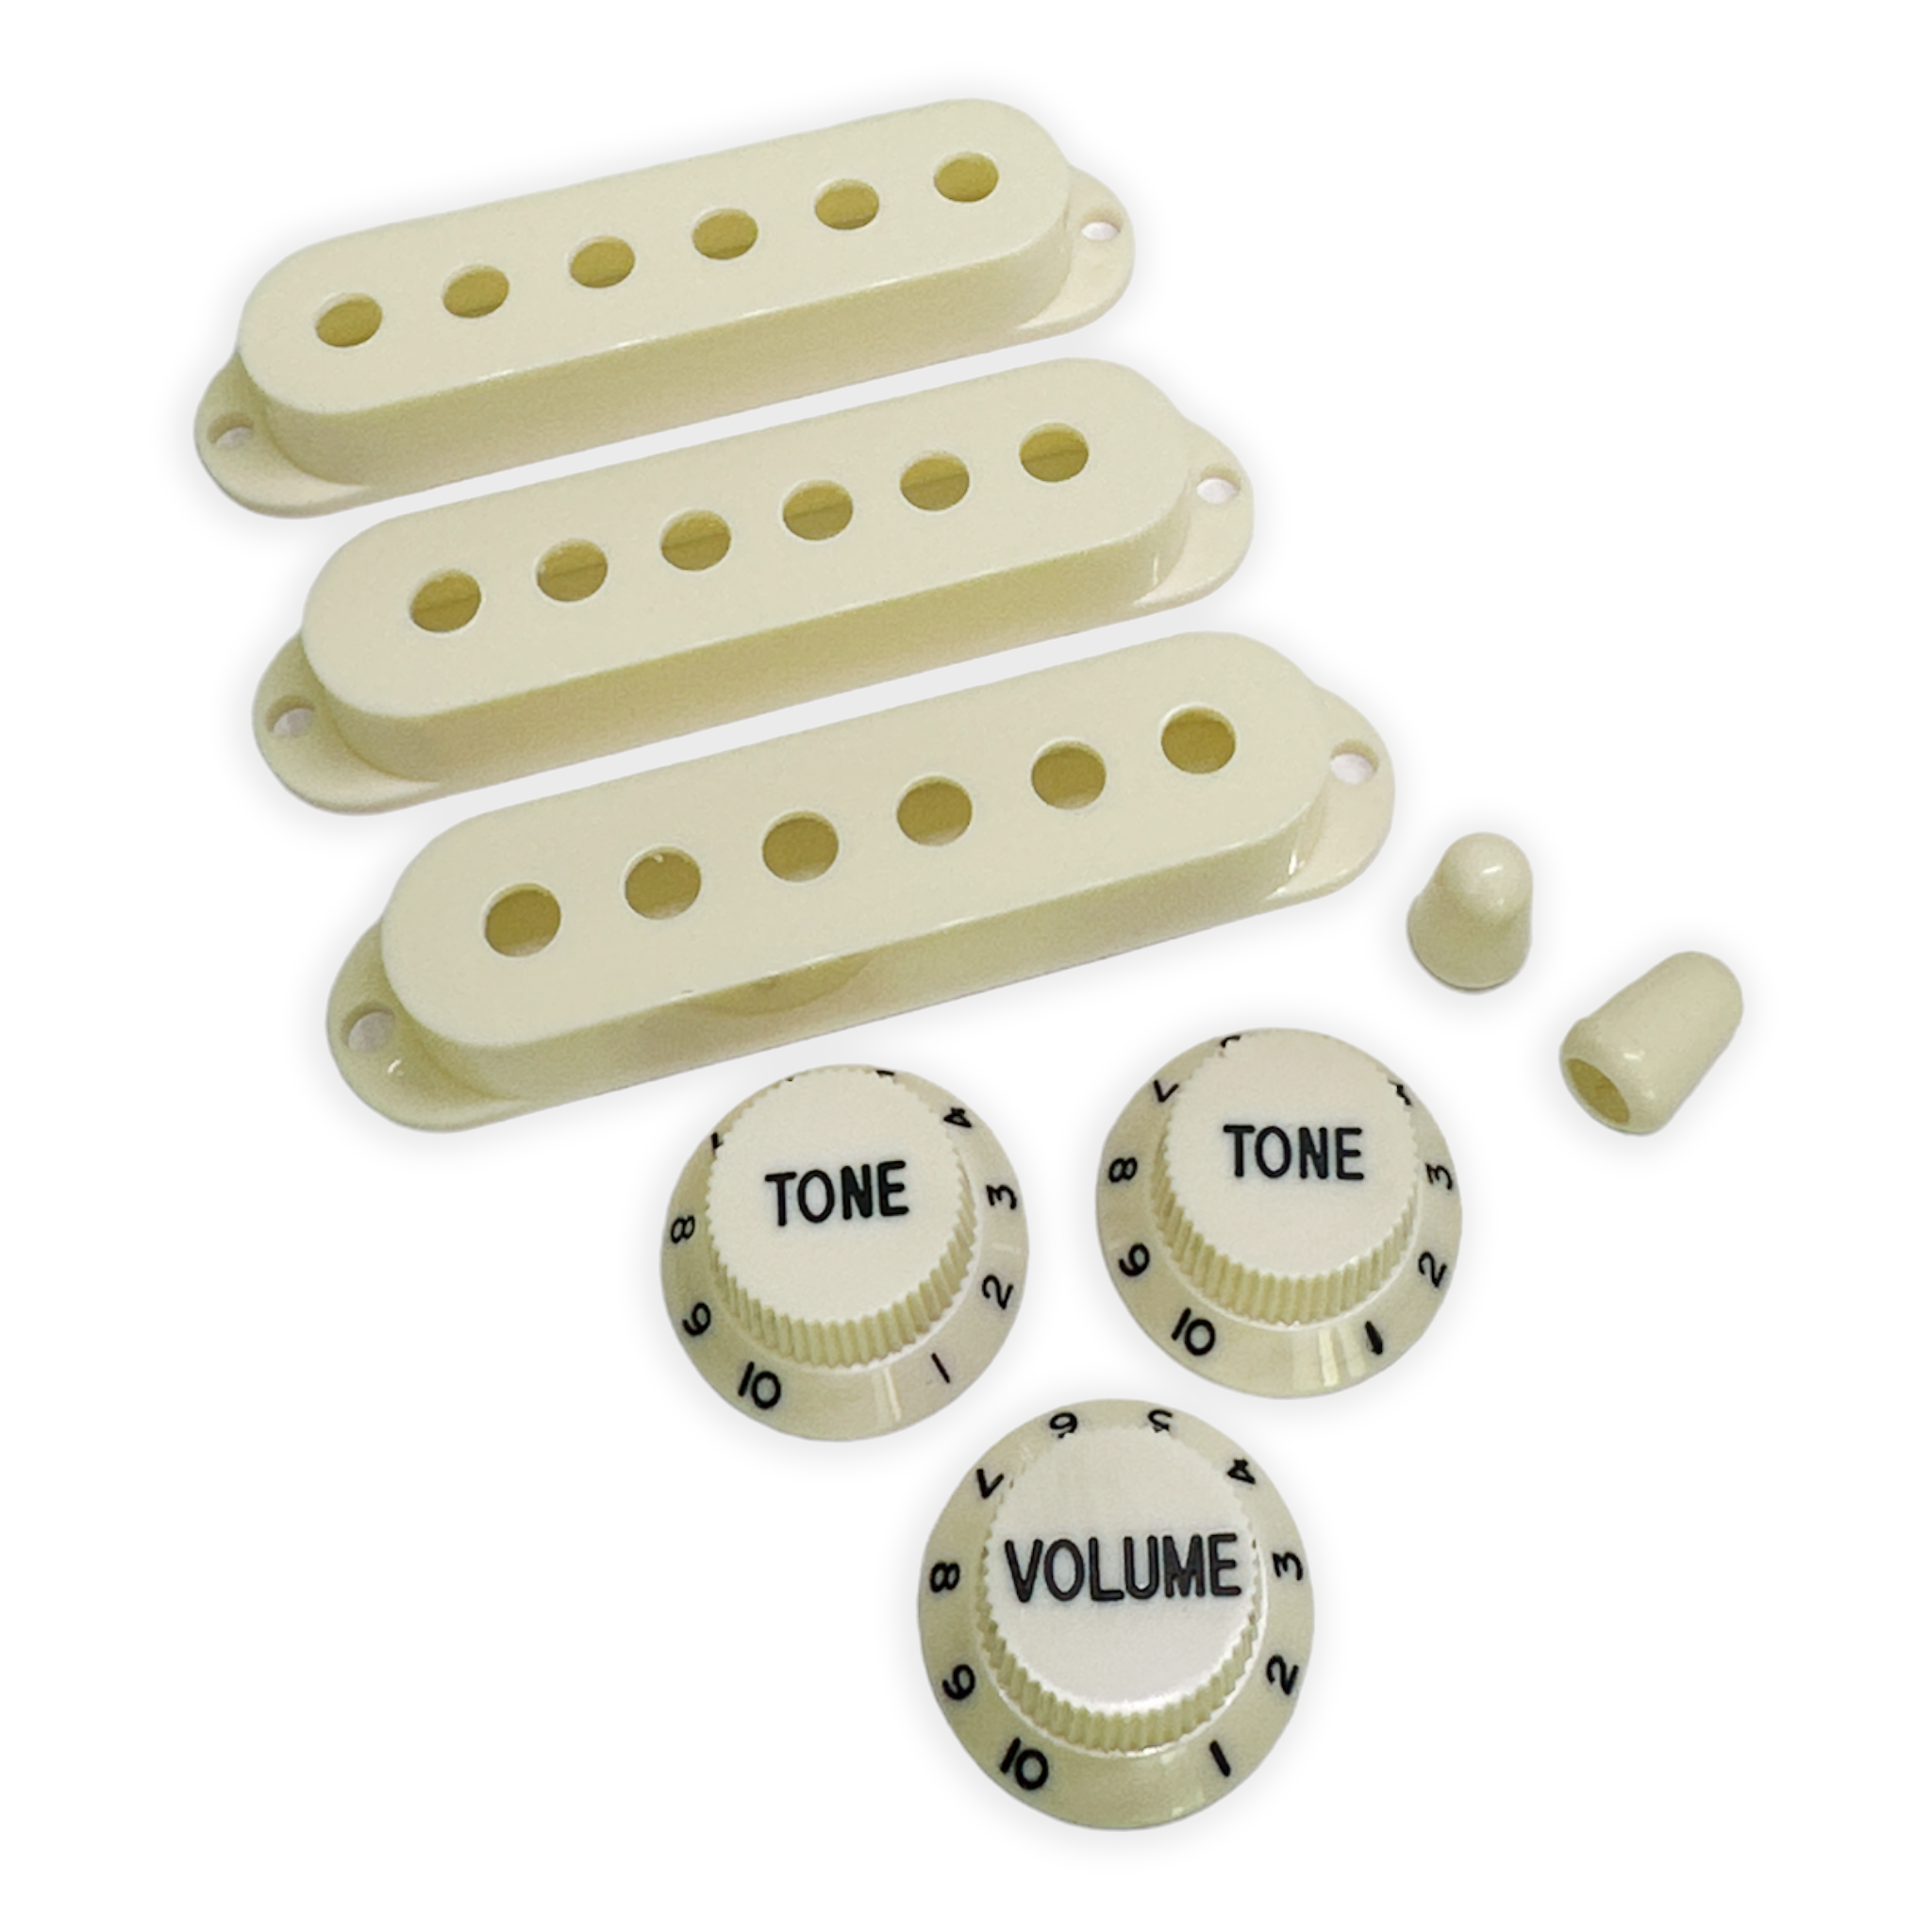 Pickup Covers, Knobs, & Switch Tips Set for Strat-Style Guitars - AxLabs